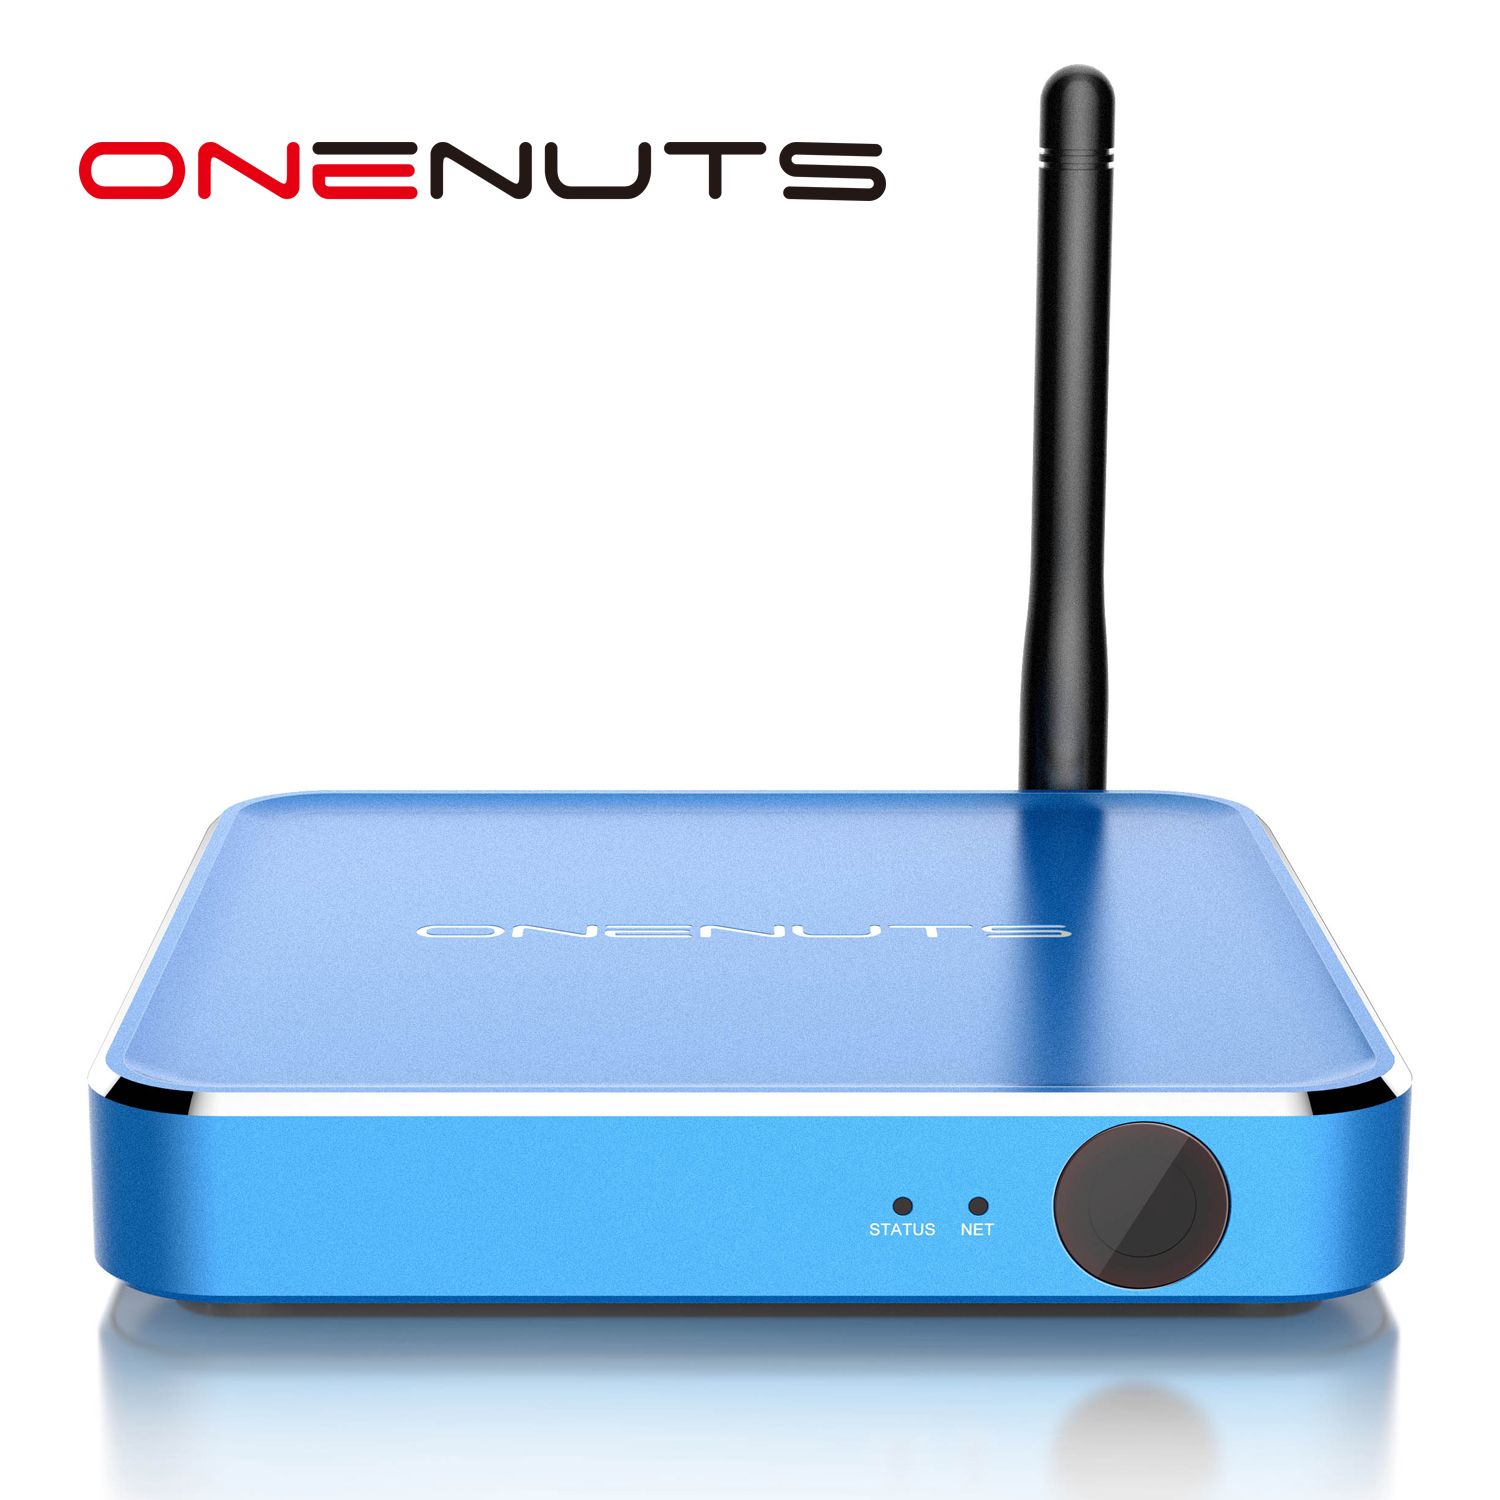 Network Media Player, nuevo Android TV Box con Android 6.0